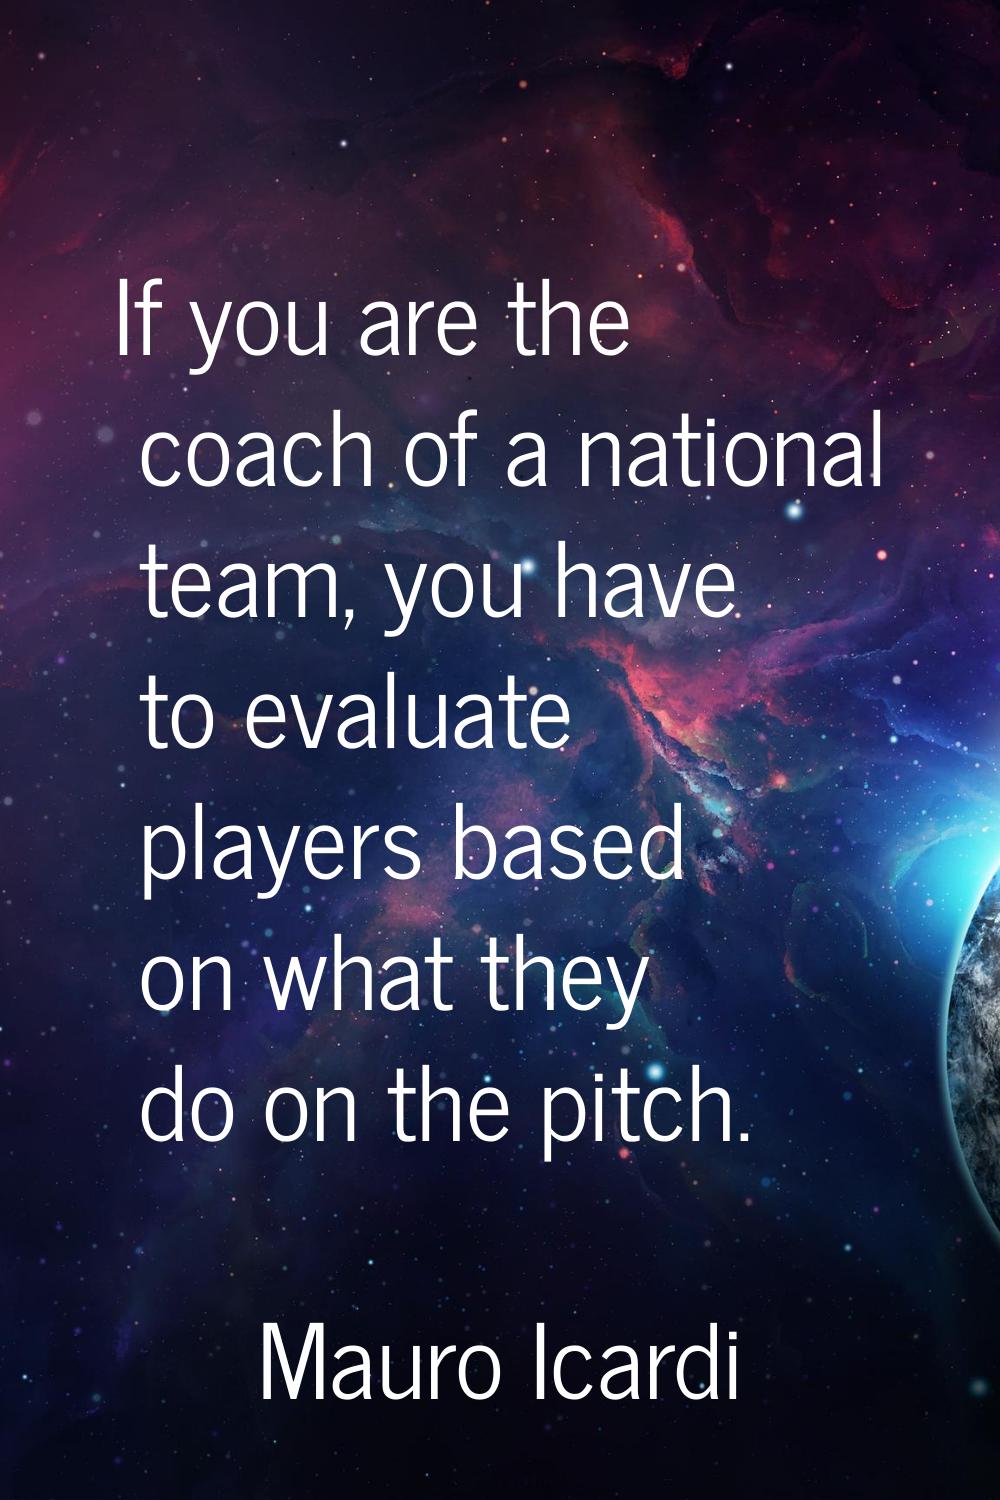 If you are the coach of a national team, you have to evaluate players based on what they do on the 